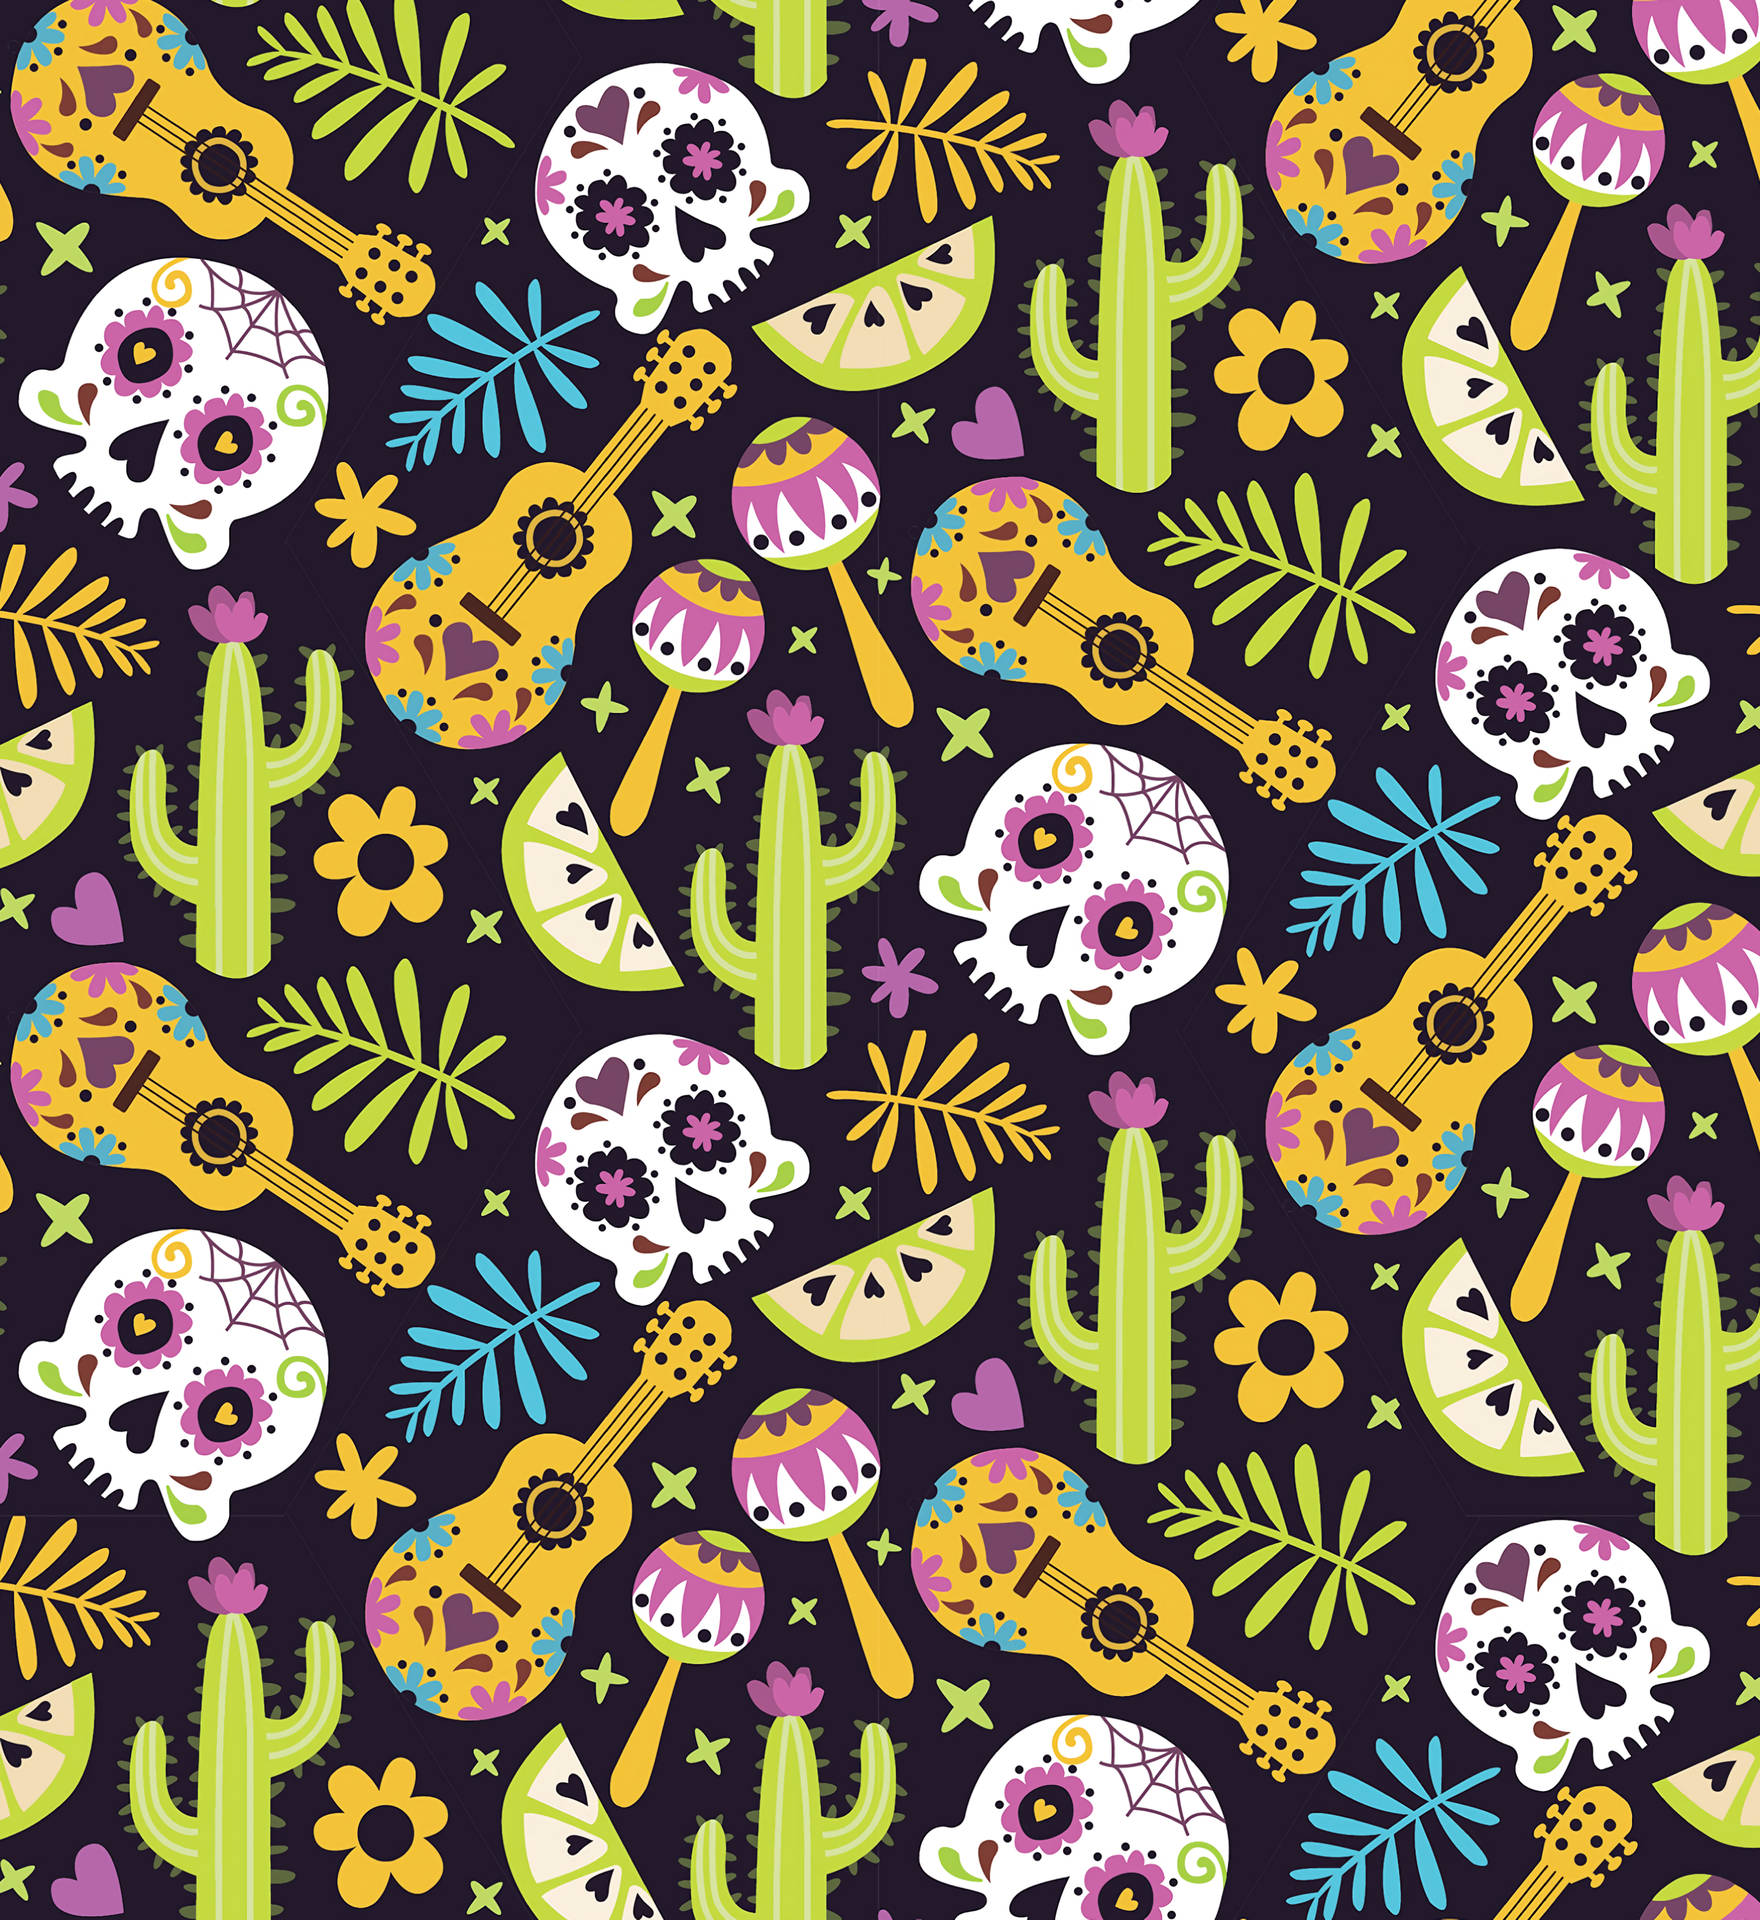 Mexico Skull-cacti-guitar Patterns Background